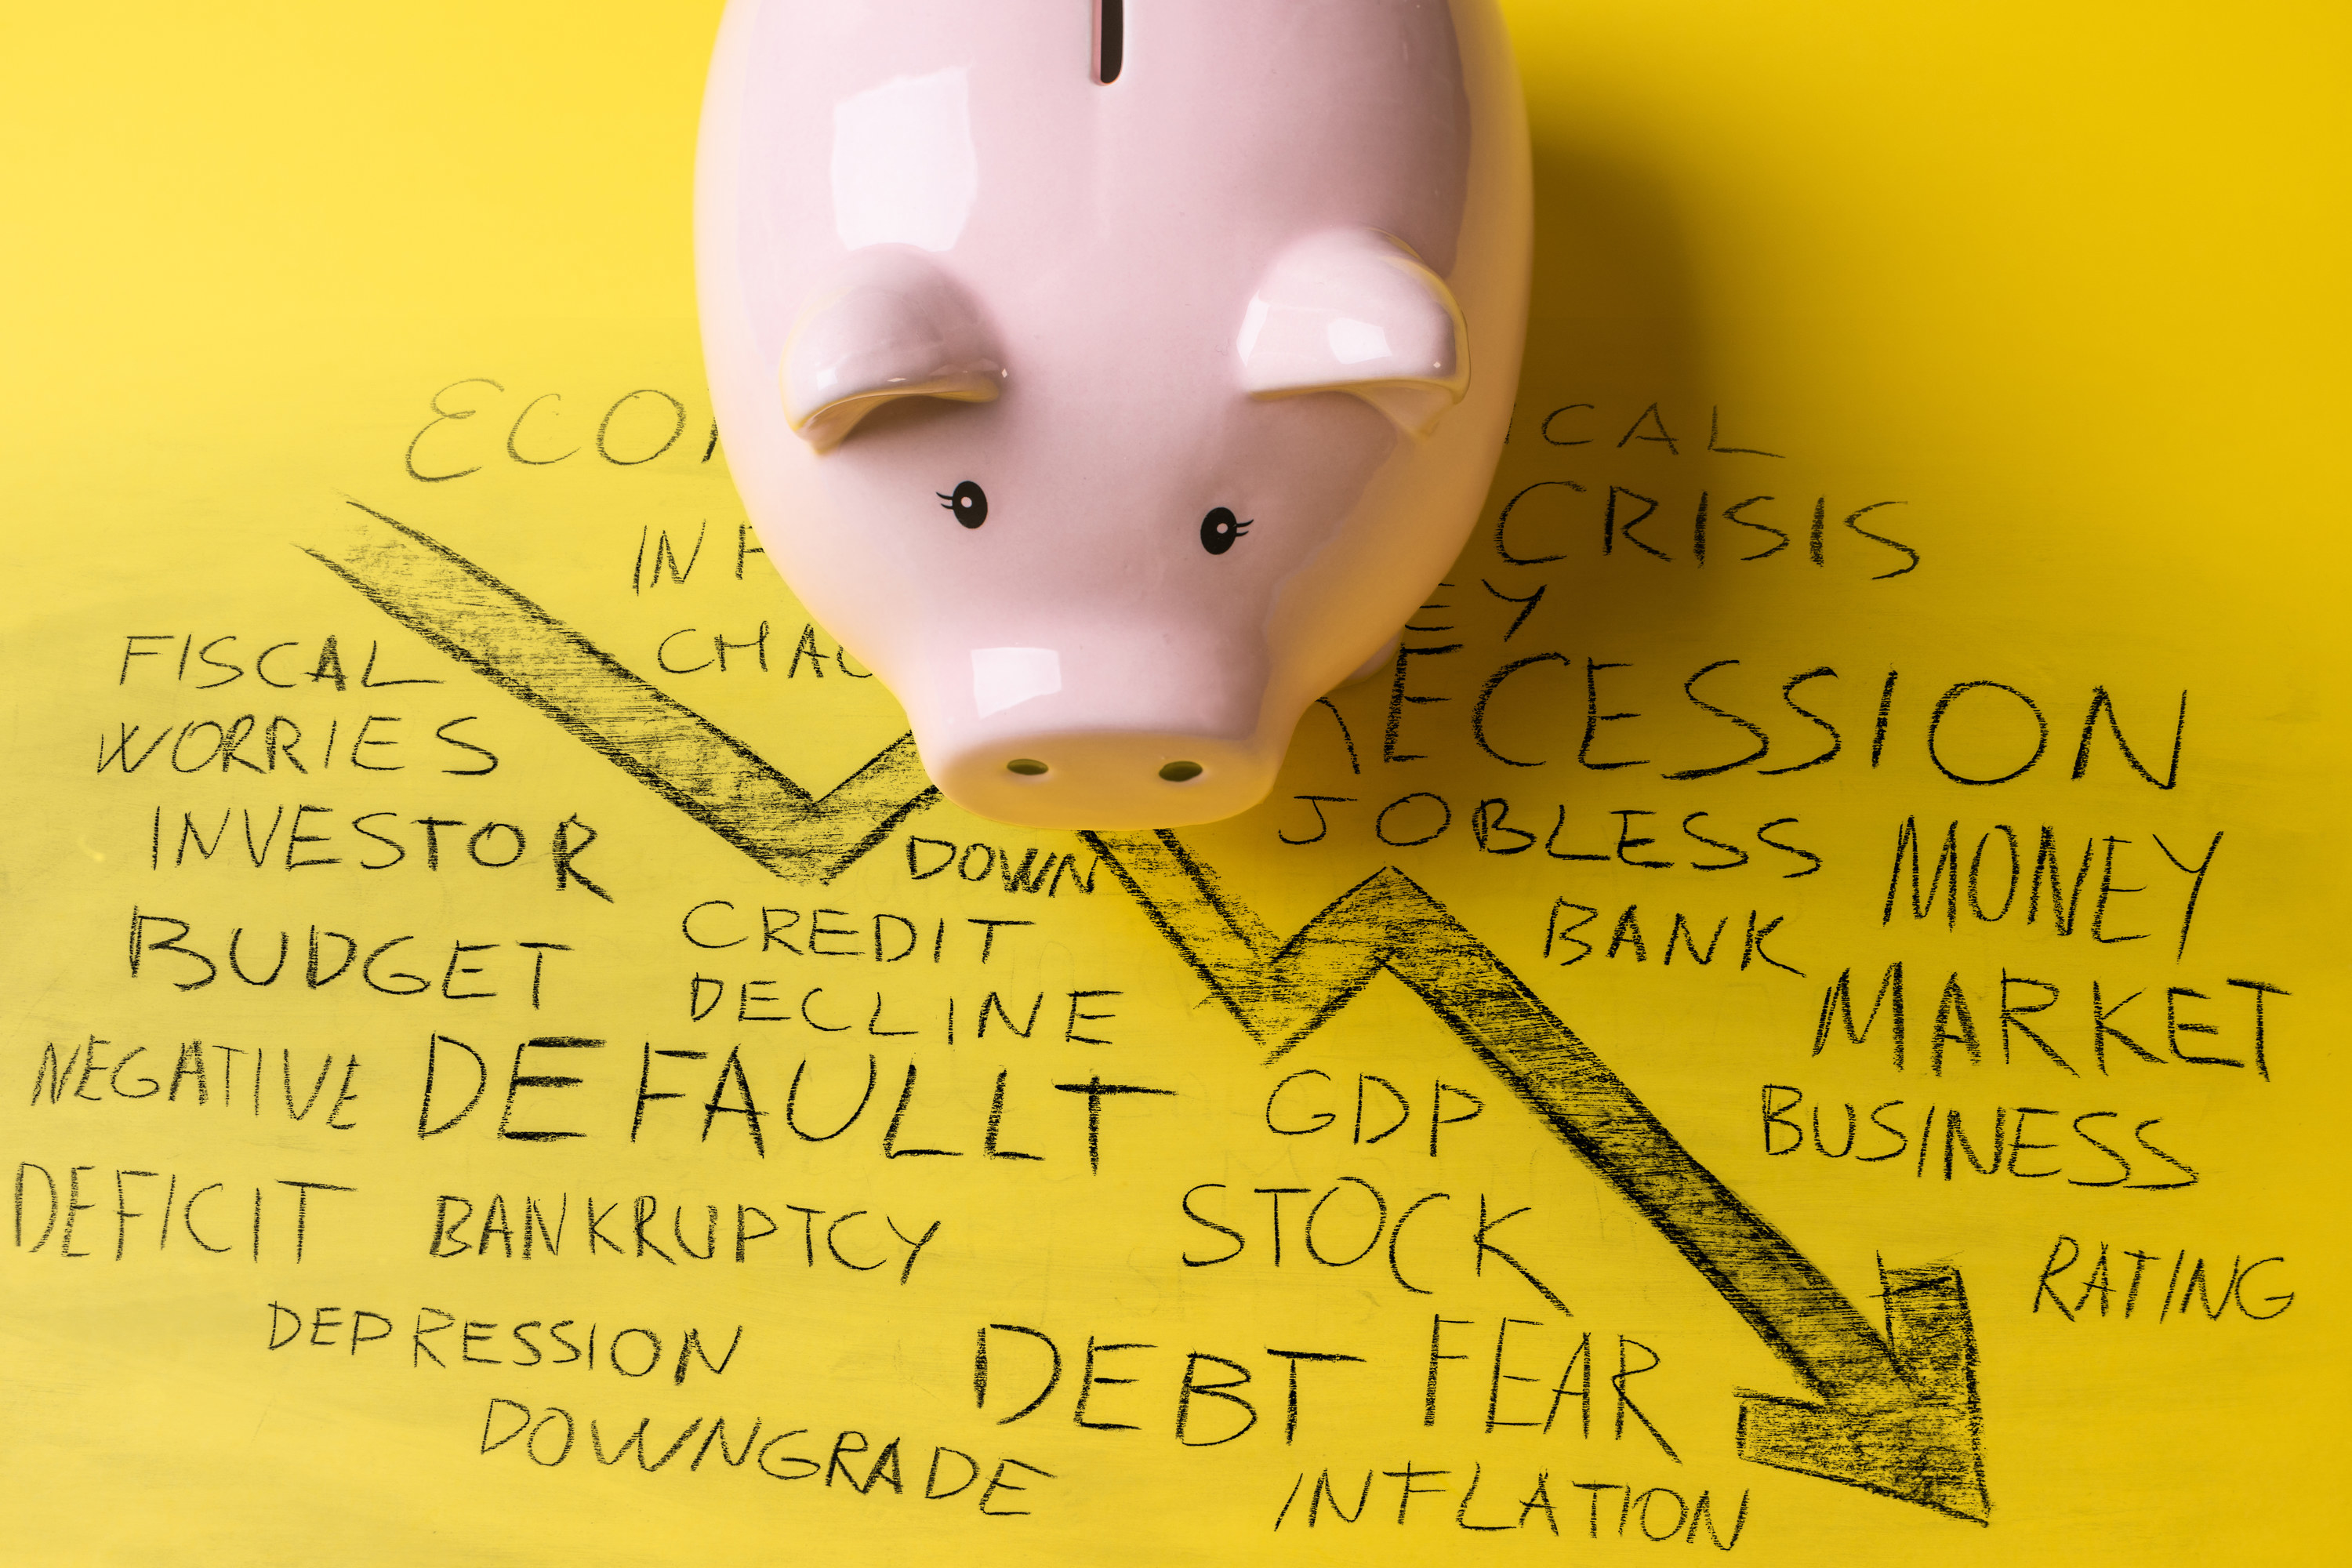 A piggy bank on a surface that has a stock market arrow going down surrounded by handwritten words like debt fear inflation worries negative jobless and downgrade